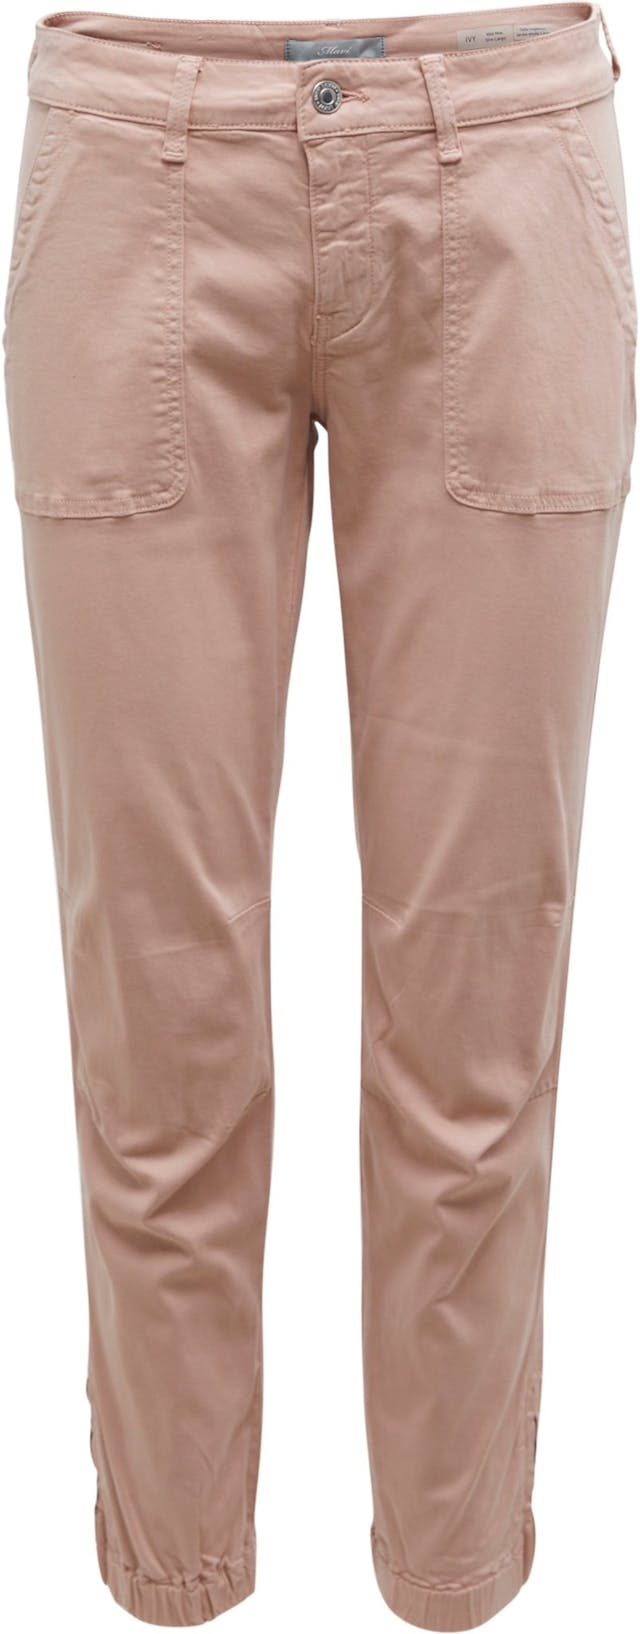 Product image for Ivy Slim Fit Cargo Pants - Women's